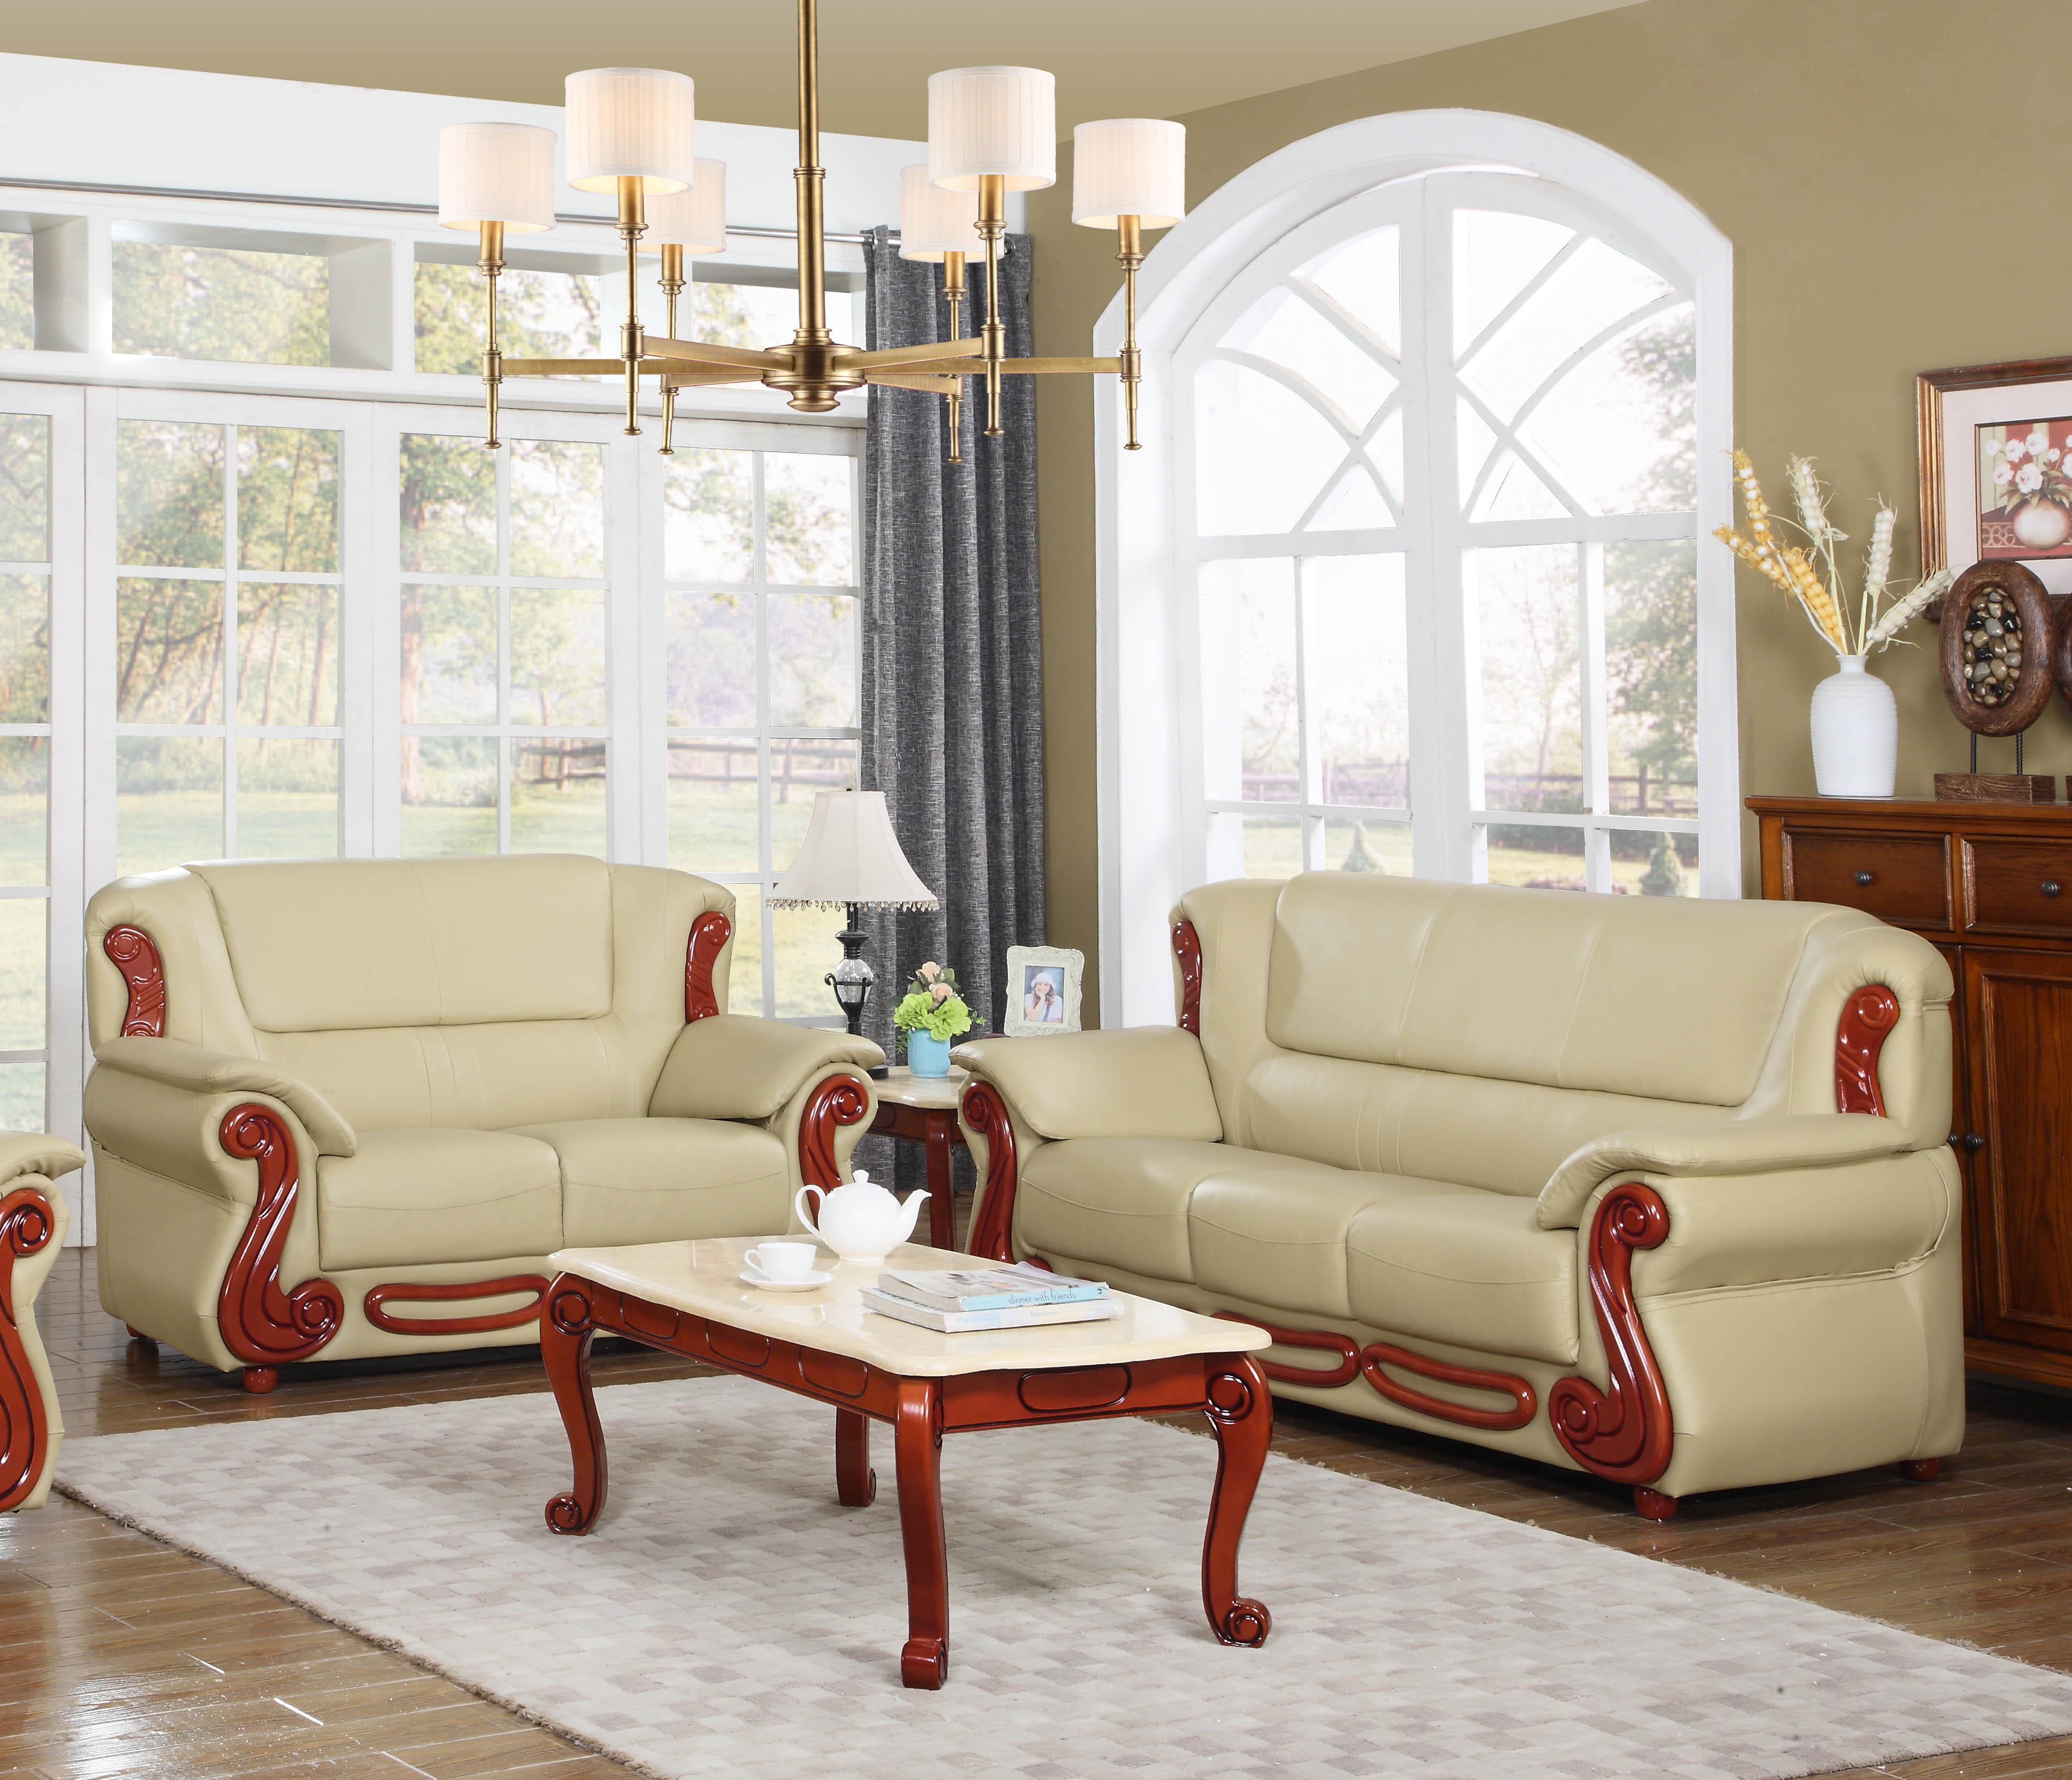 

    
Meridian 632 Bella Khaki Bonded Leather Living Room Set 2Ps Traditional Classic
